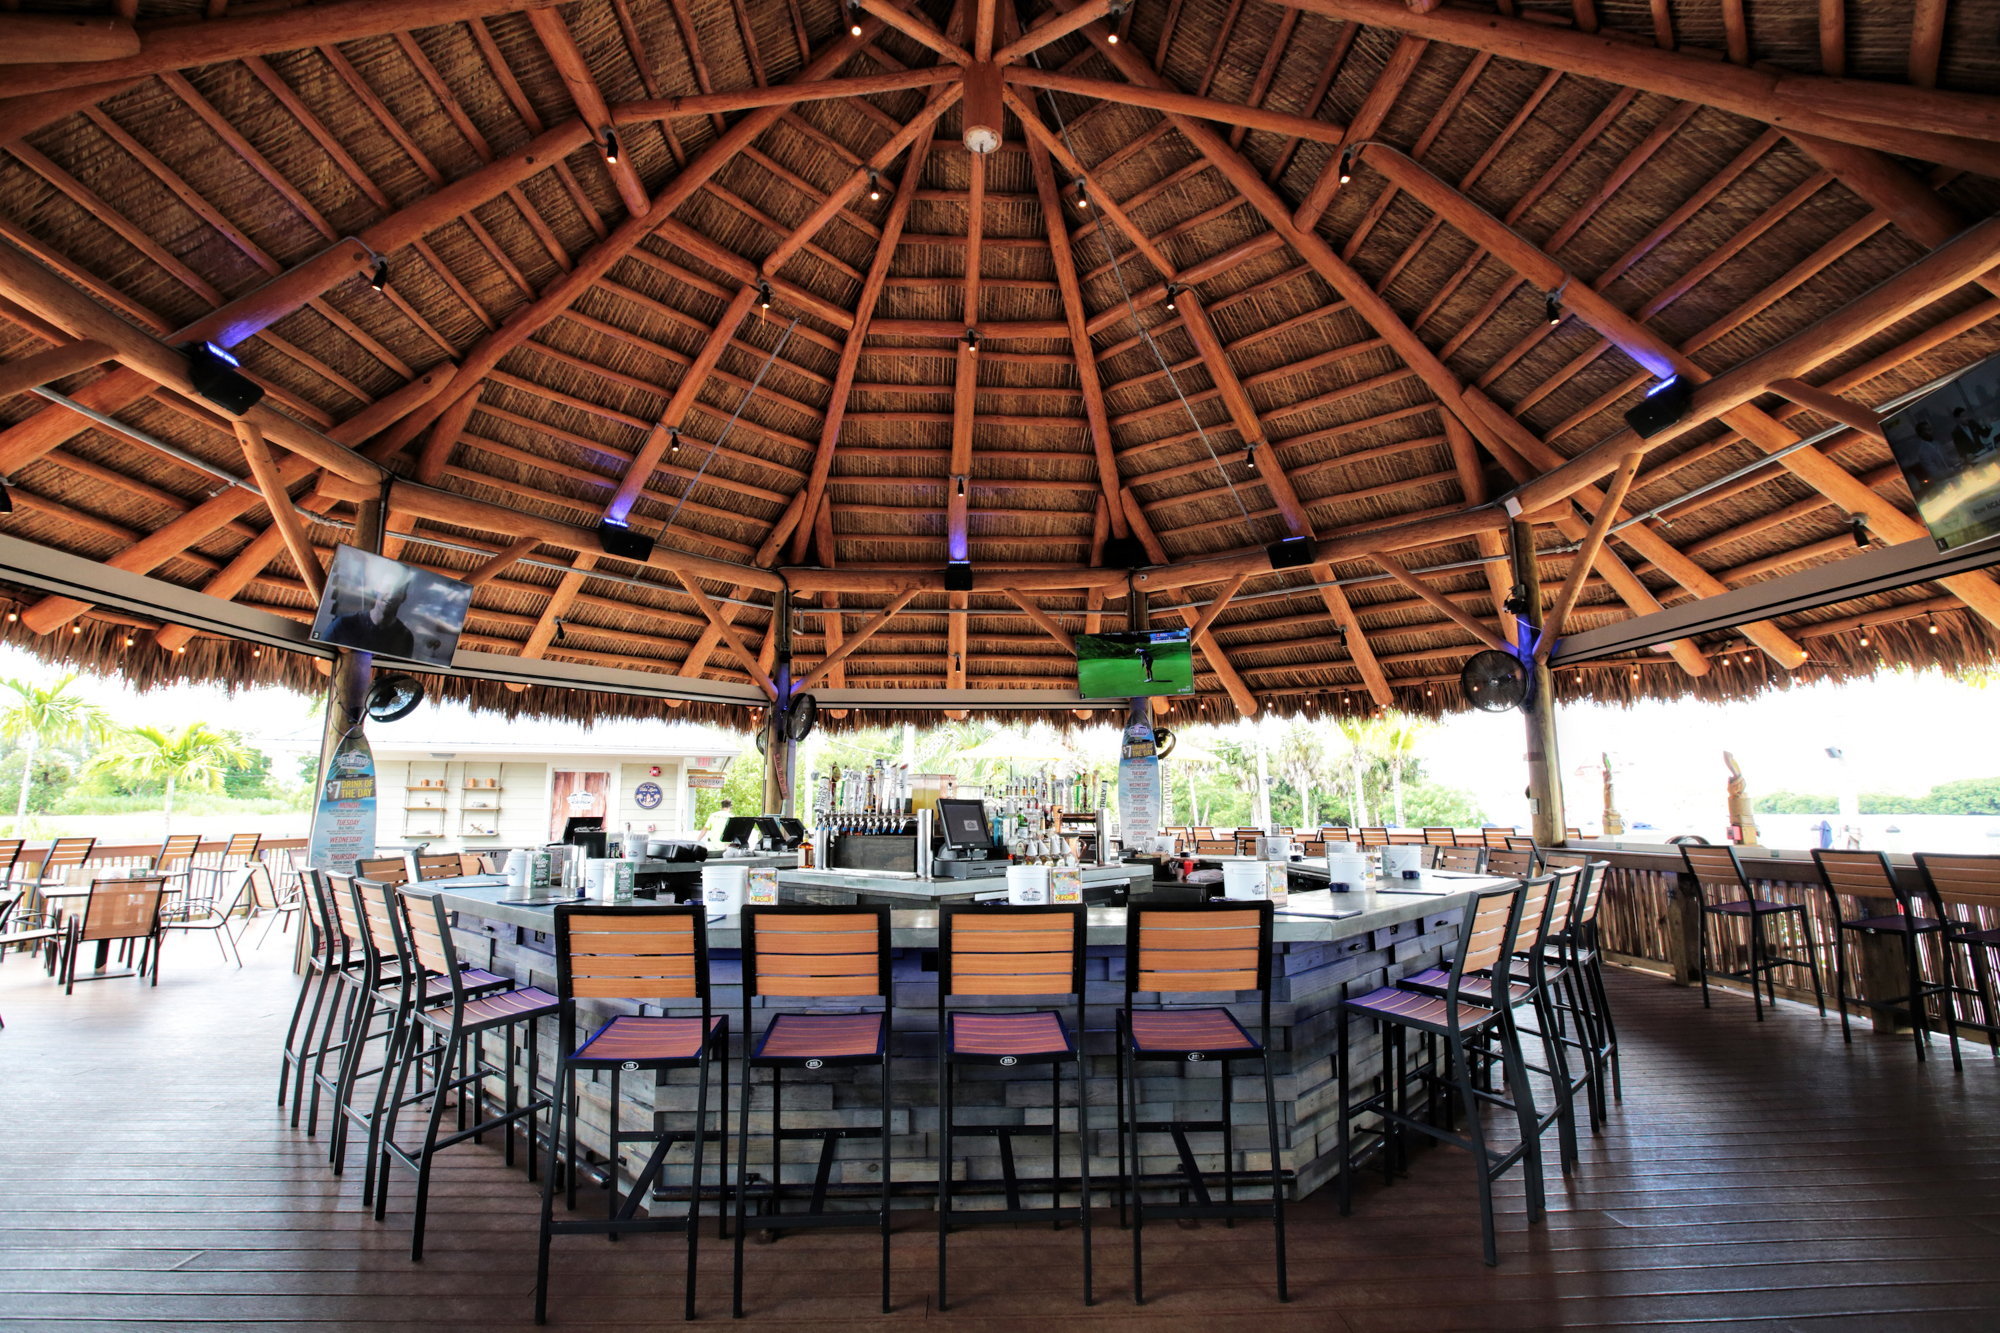 Boathouse Tiki Bar & Grill in Fort Myers. Photo by Stefania Pifferi.